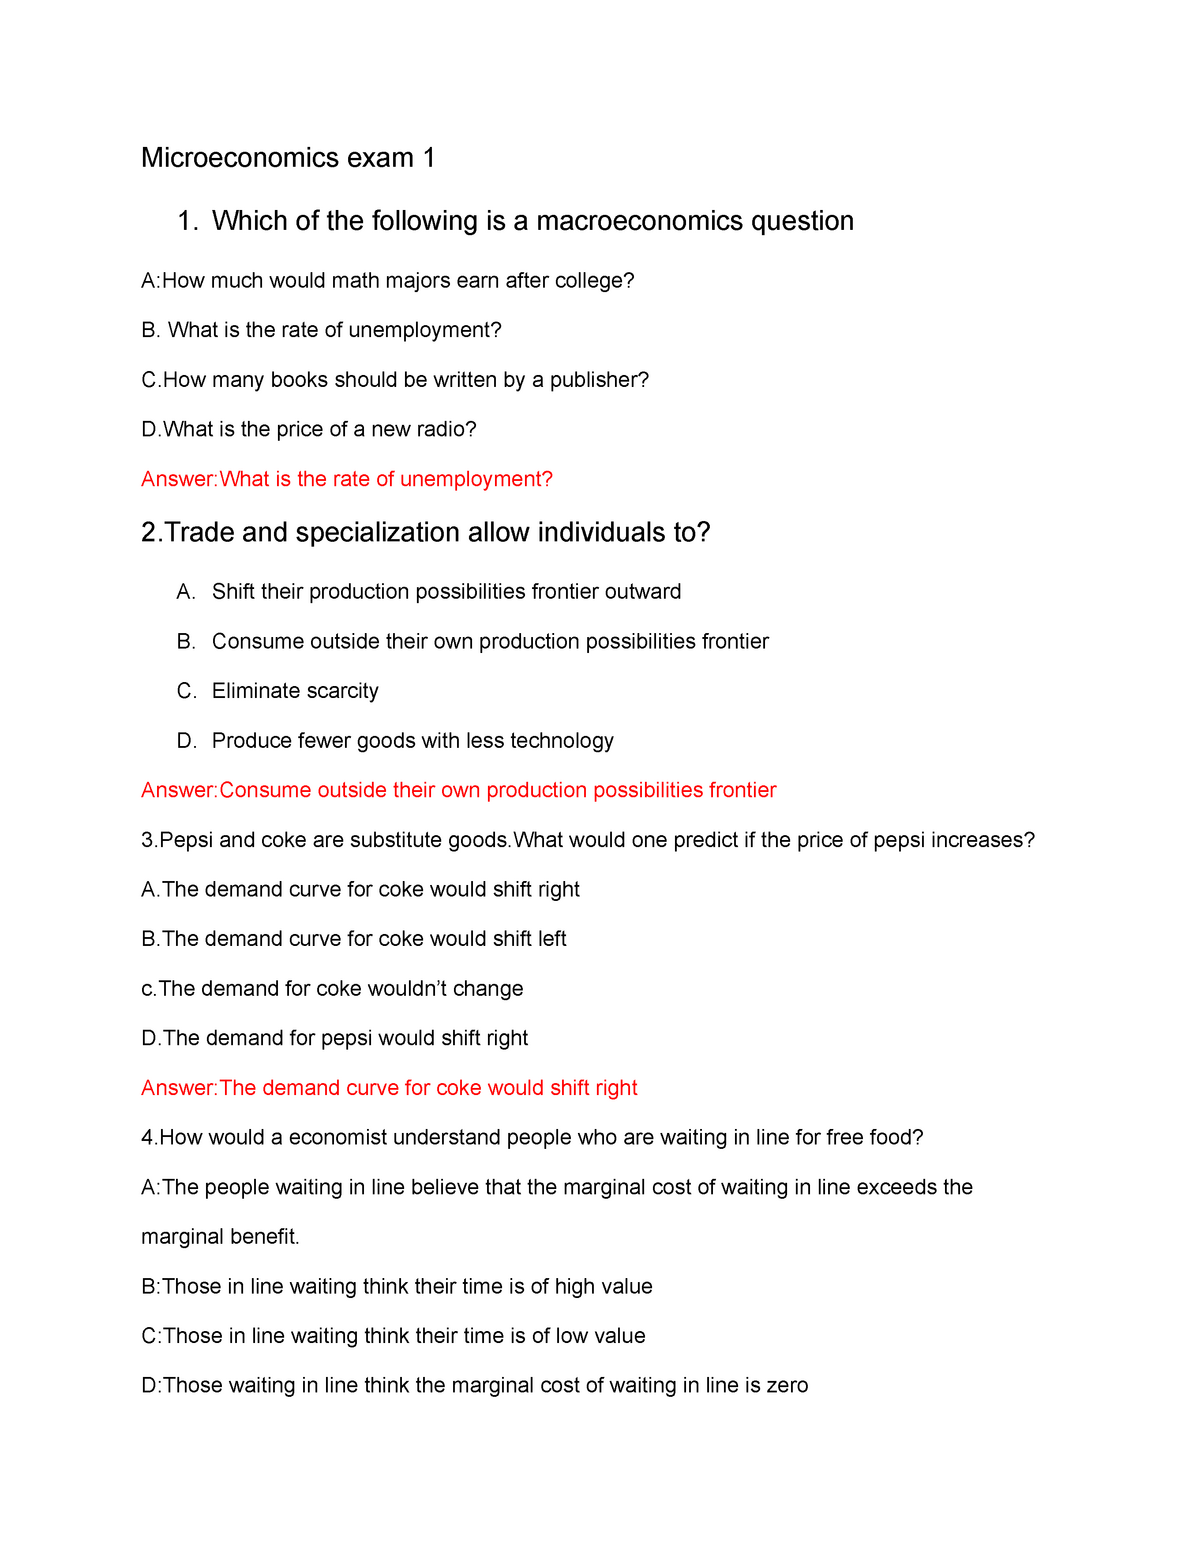 Microeconomics exam questions and answers